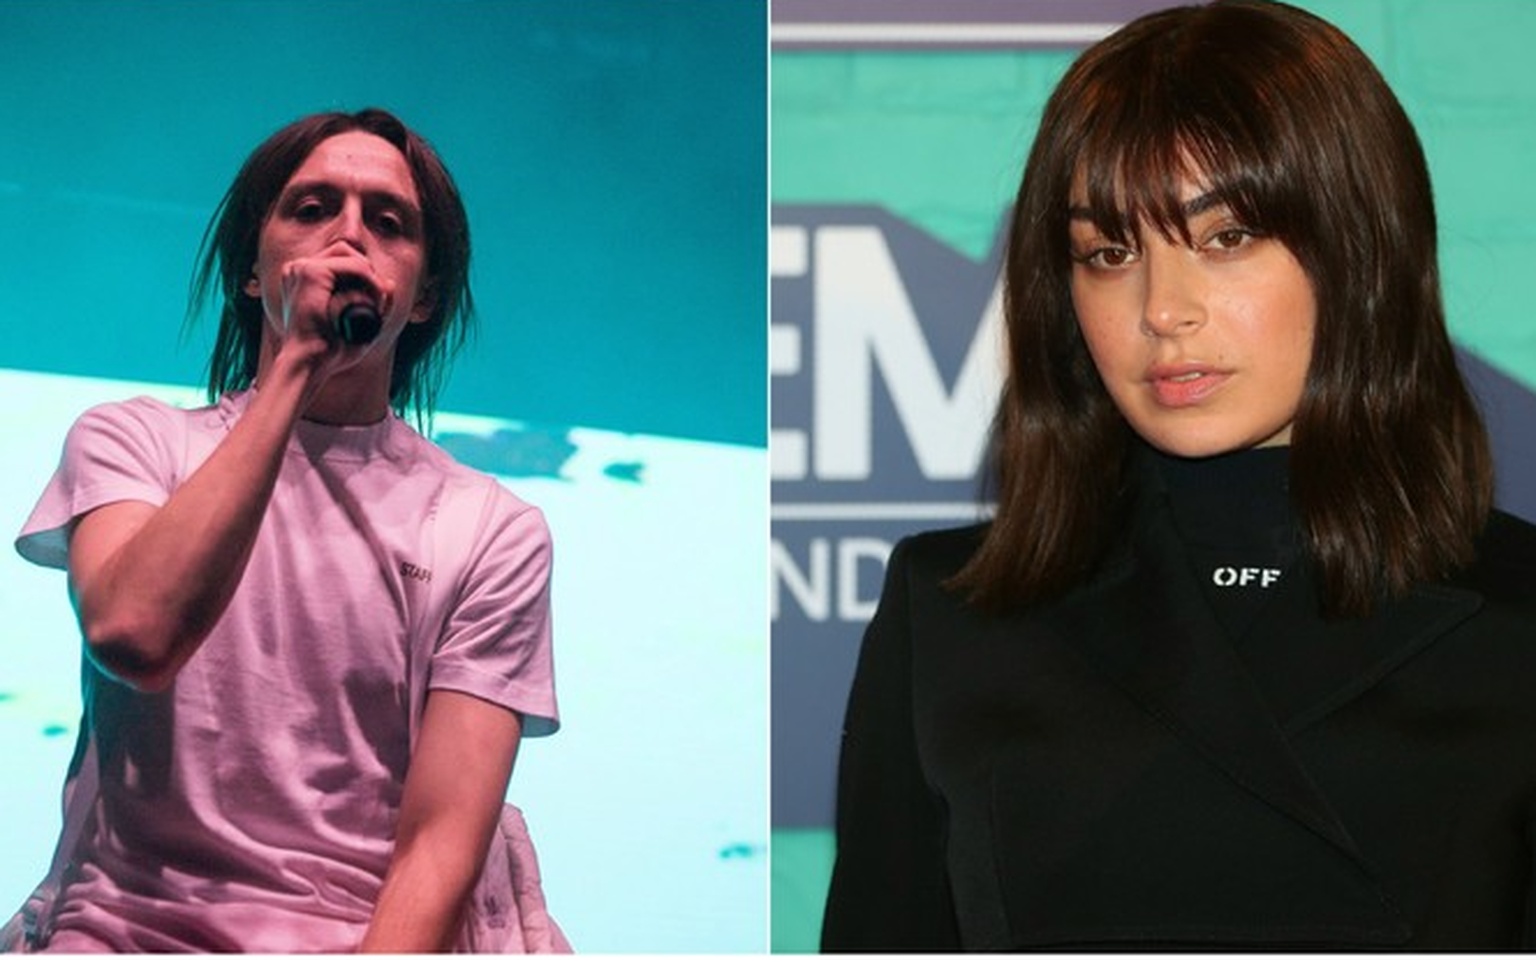 Tommy Cash, Charlie XCX